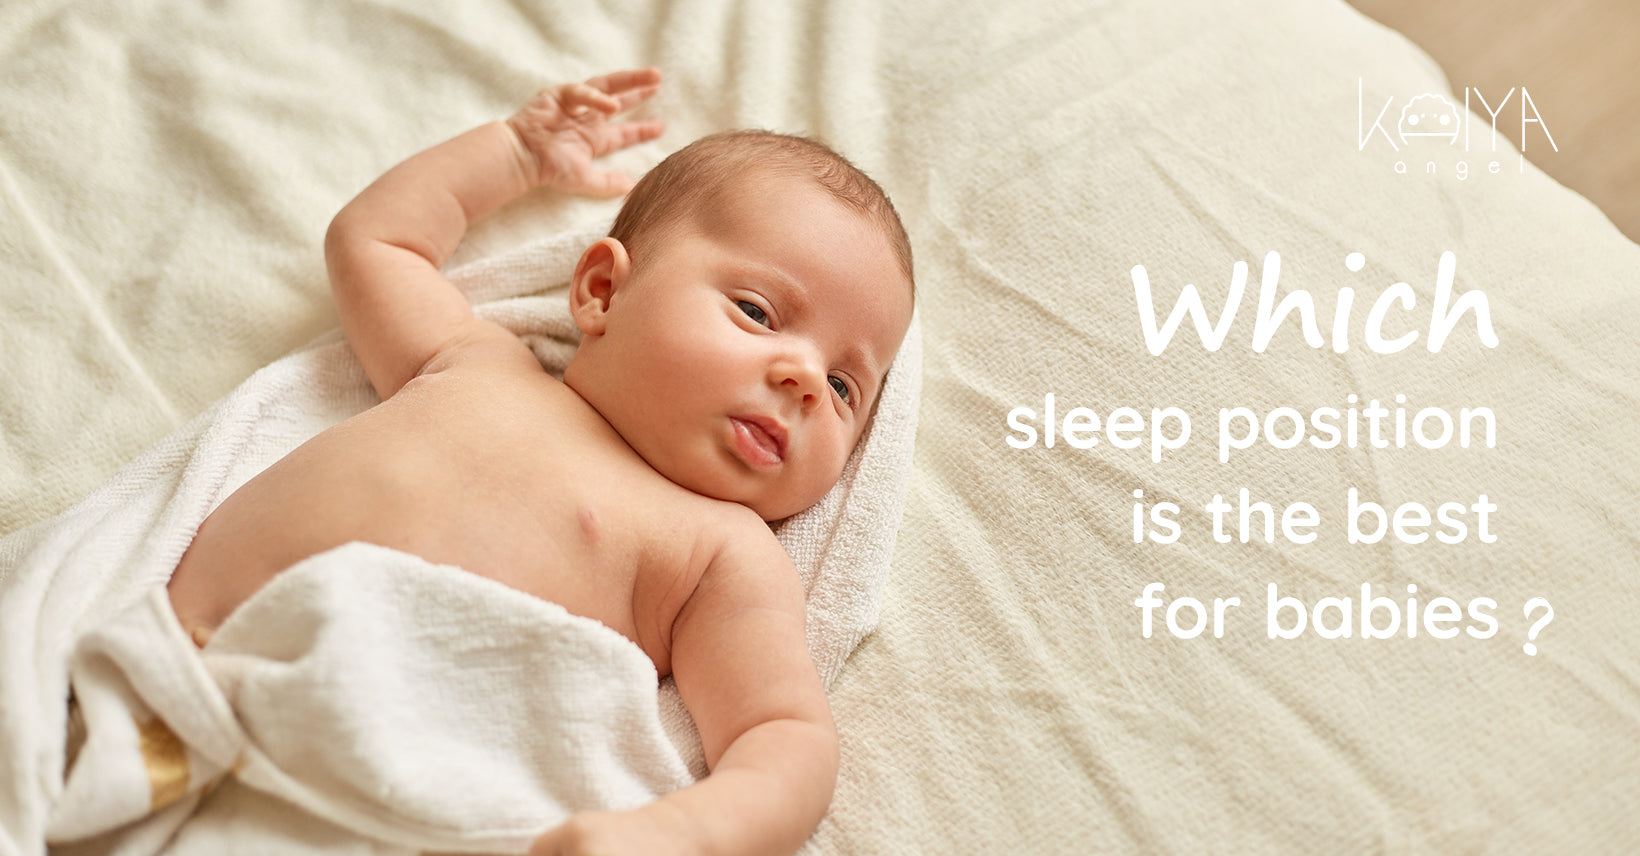 Which sleep position is the best for babies